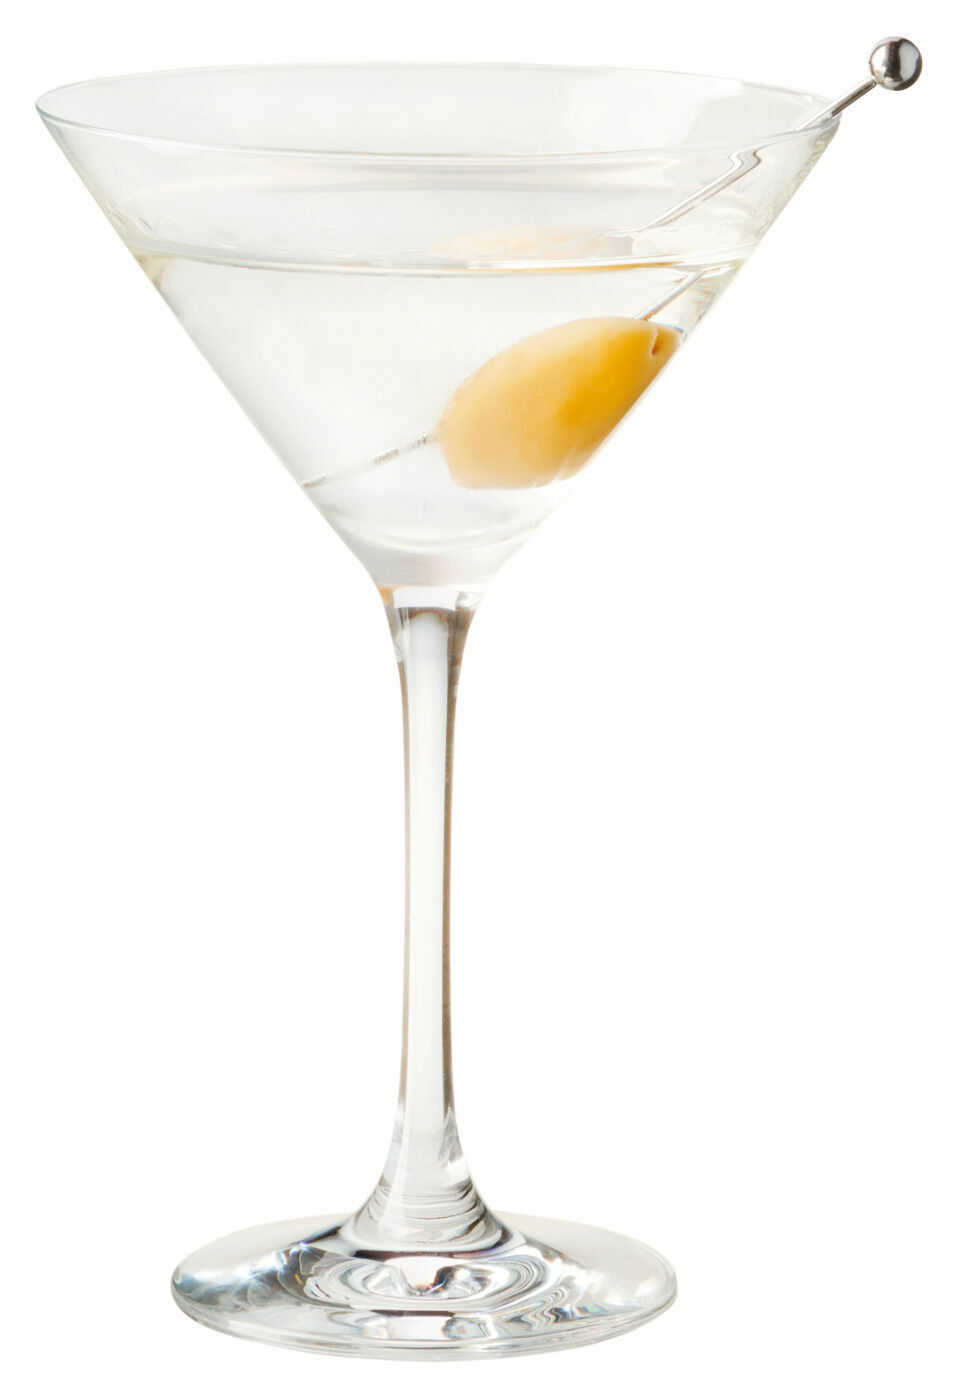 How to Make the Dry Martini